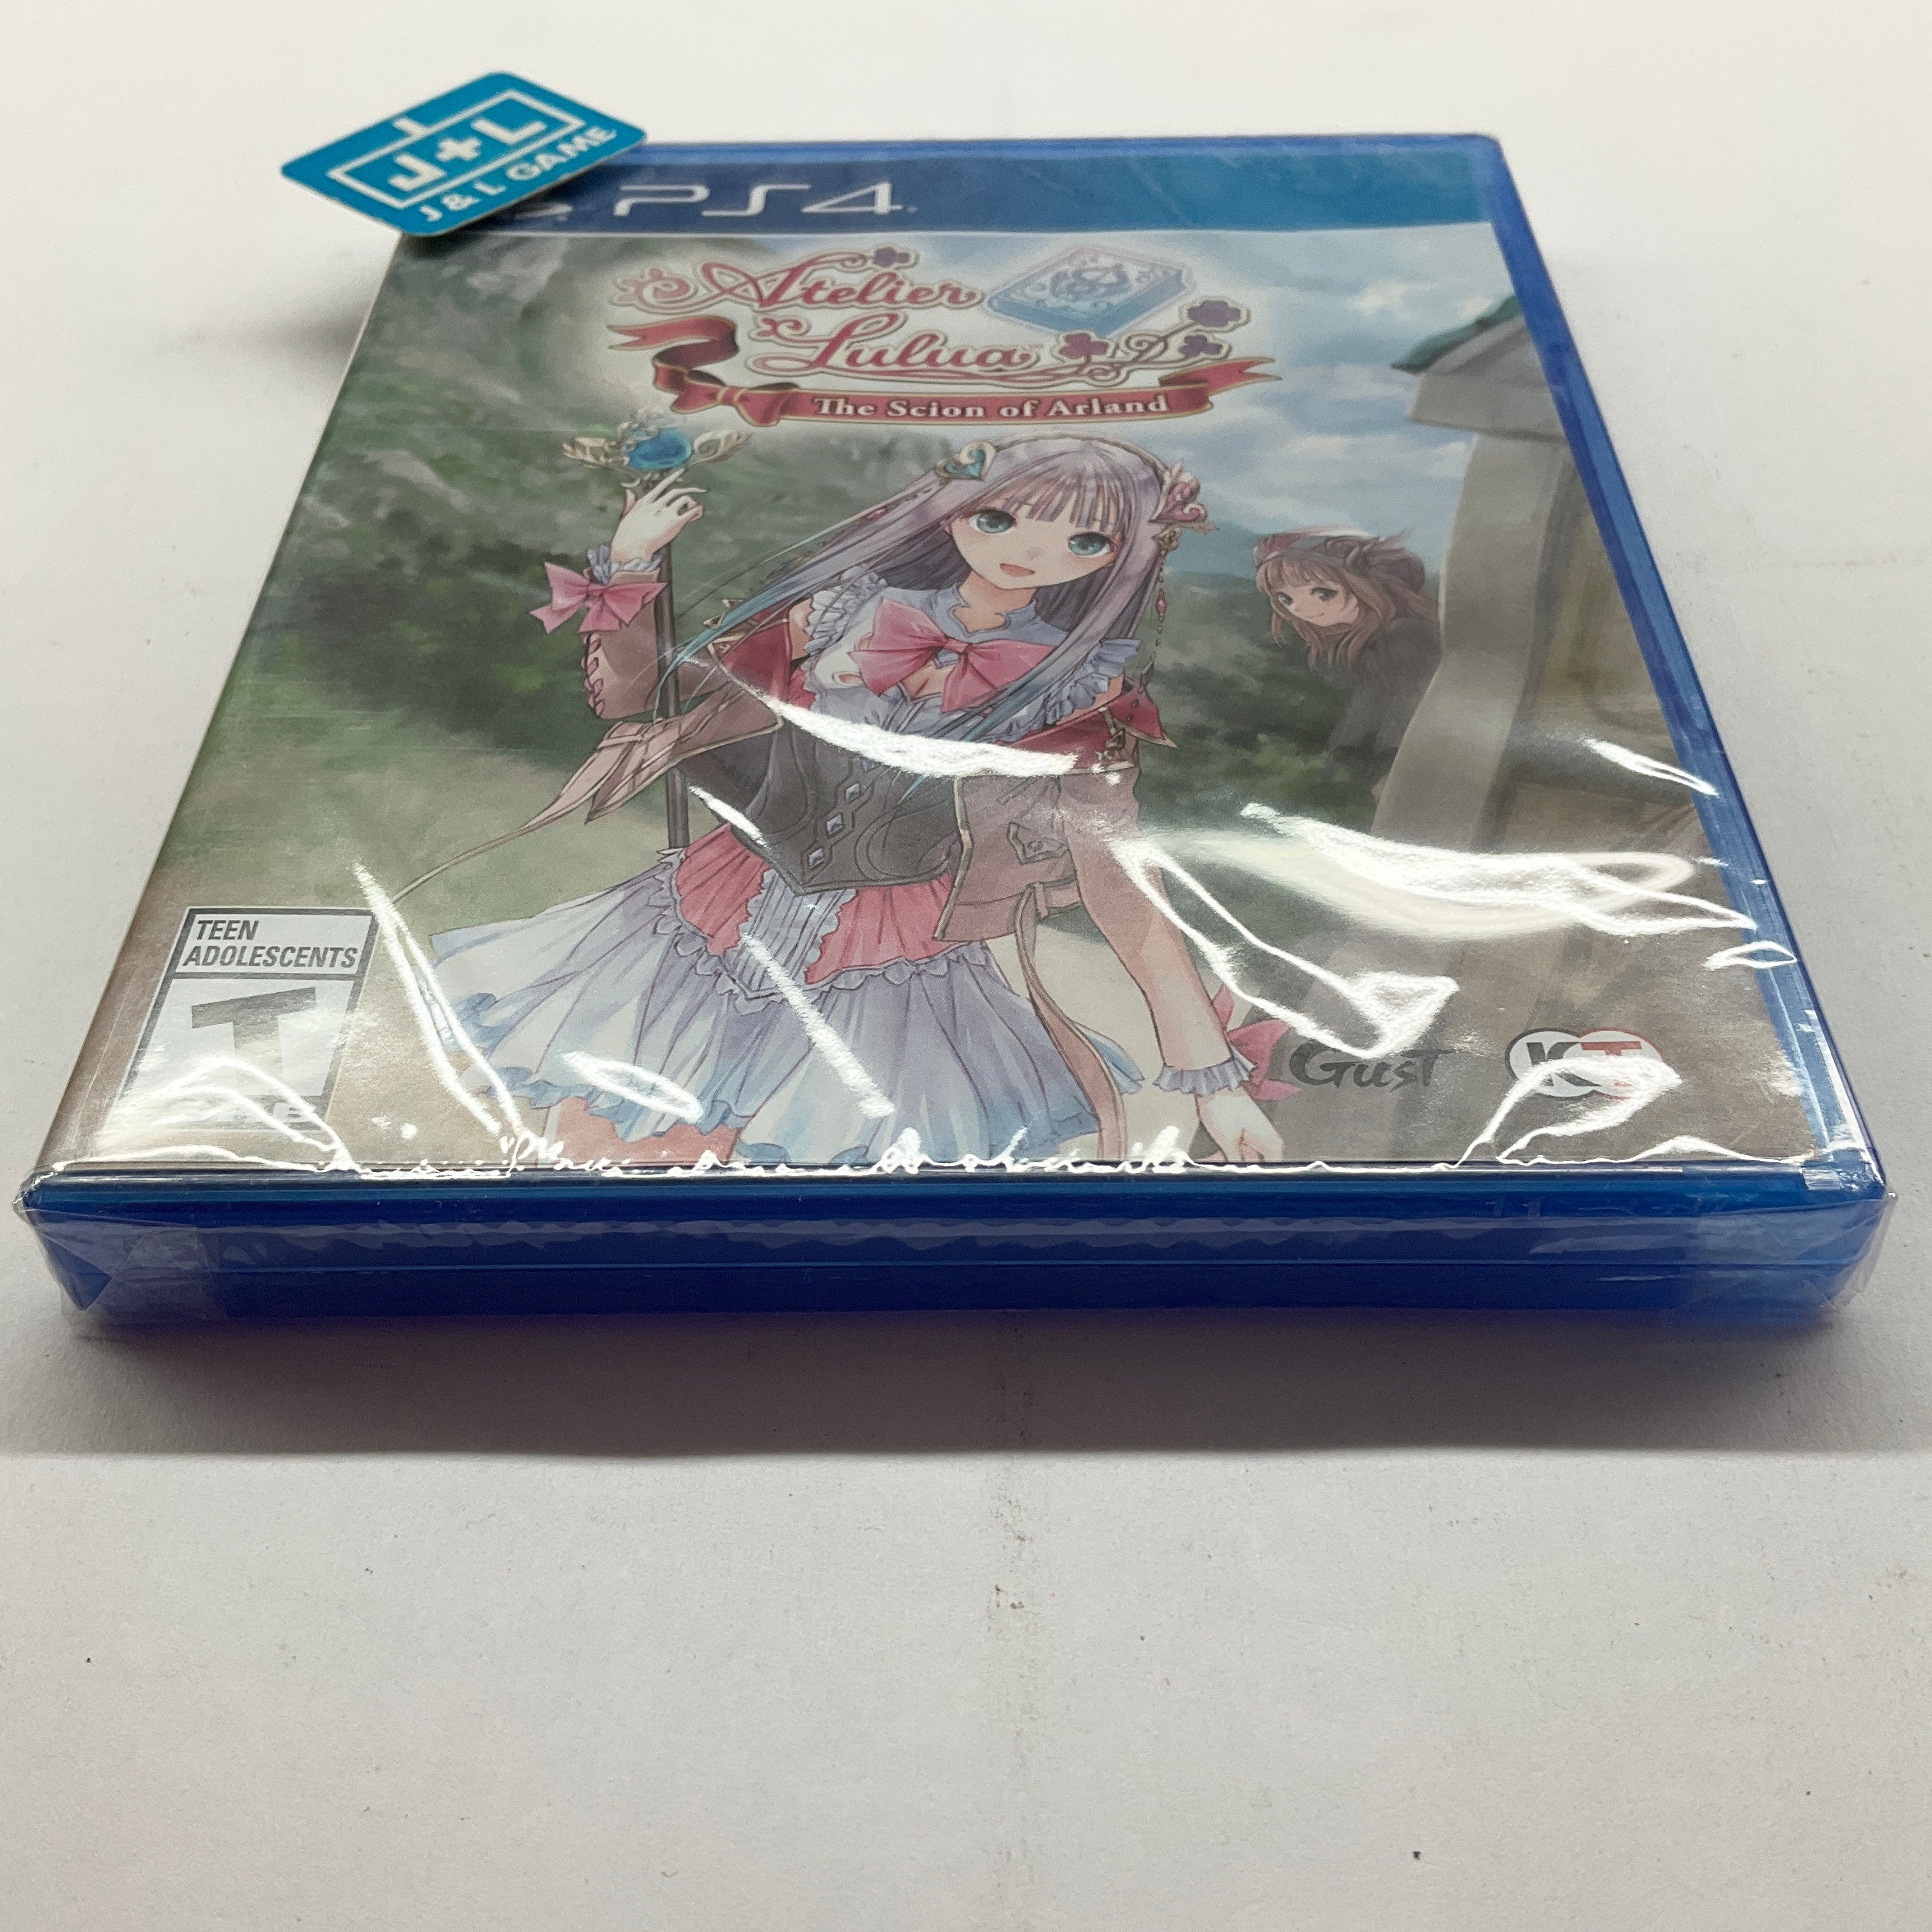 Atelier Lulua: The Scion of Arland - (PS4) PlayStation 4 Video Games KT   